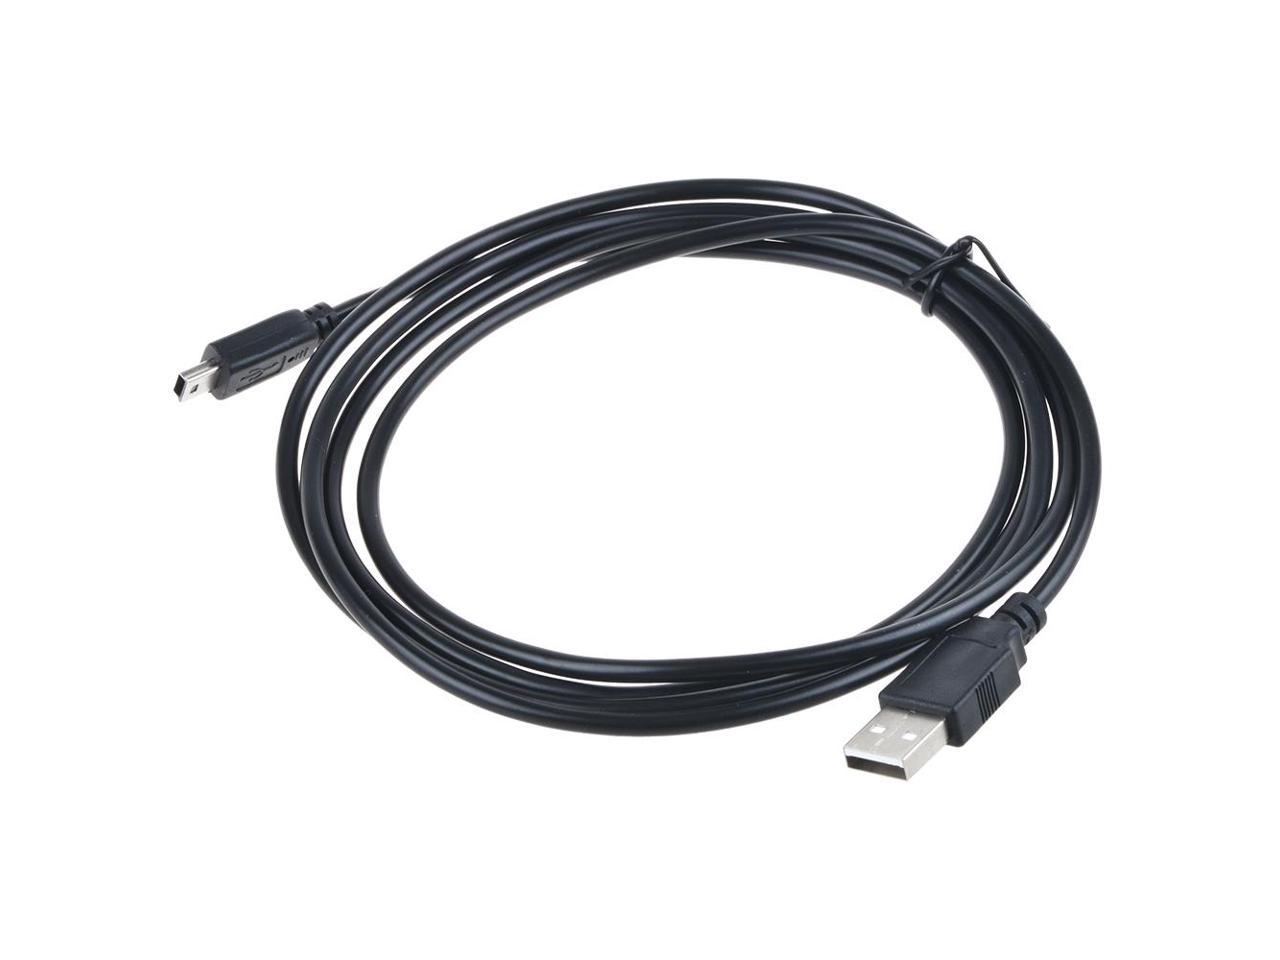 SLLEA USB Cable Computer PC Laptop Data Sync Cord for Zoom MS-60B MS60B Multistomp Bass Effects Pedal 